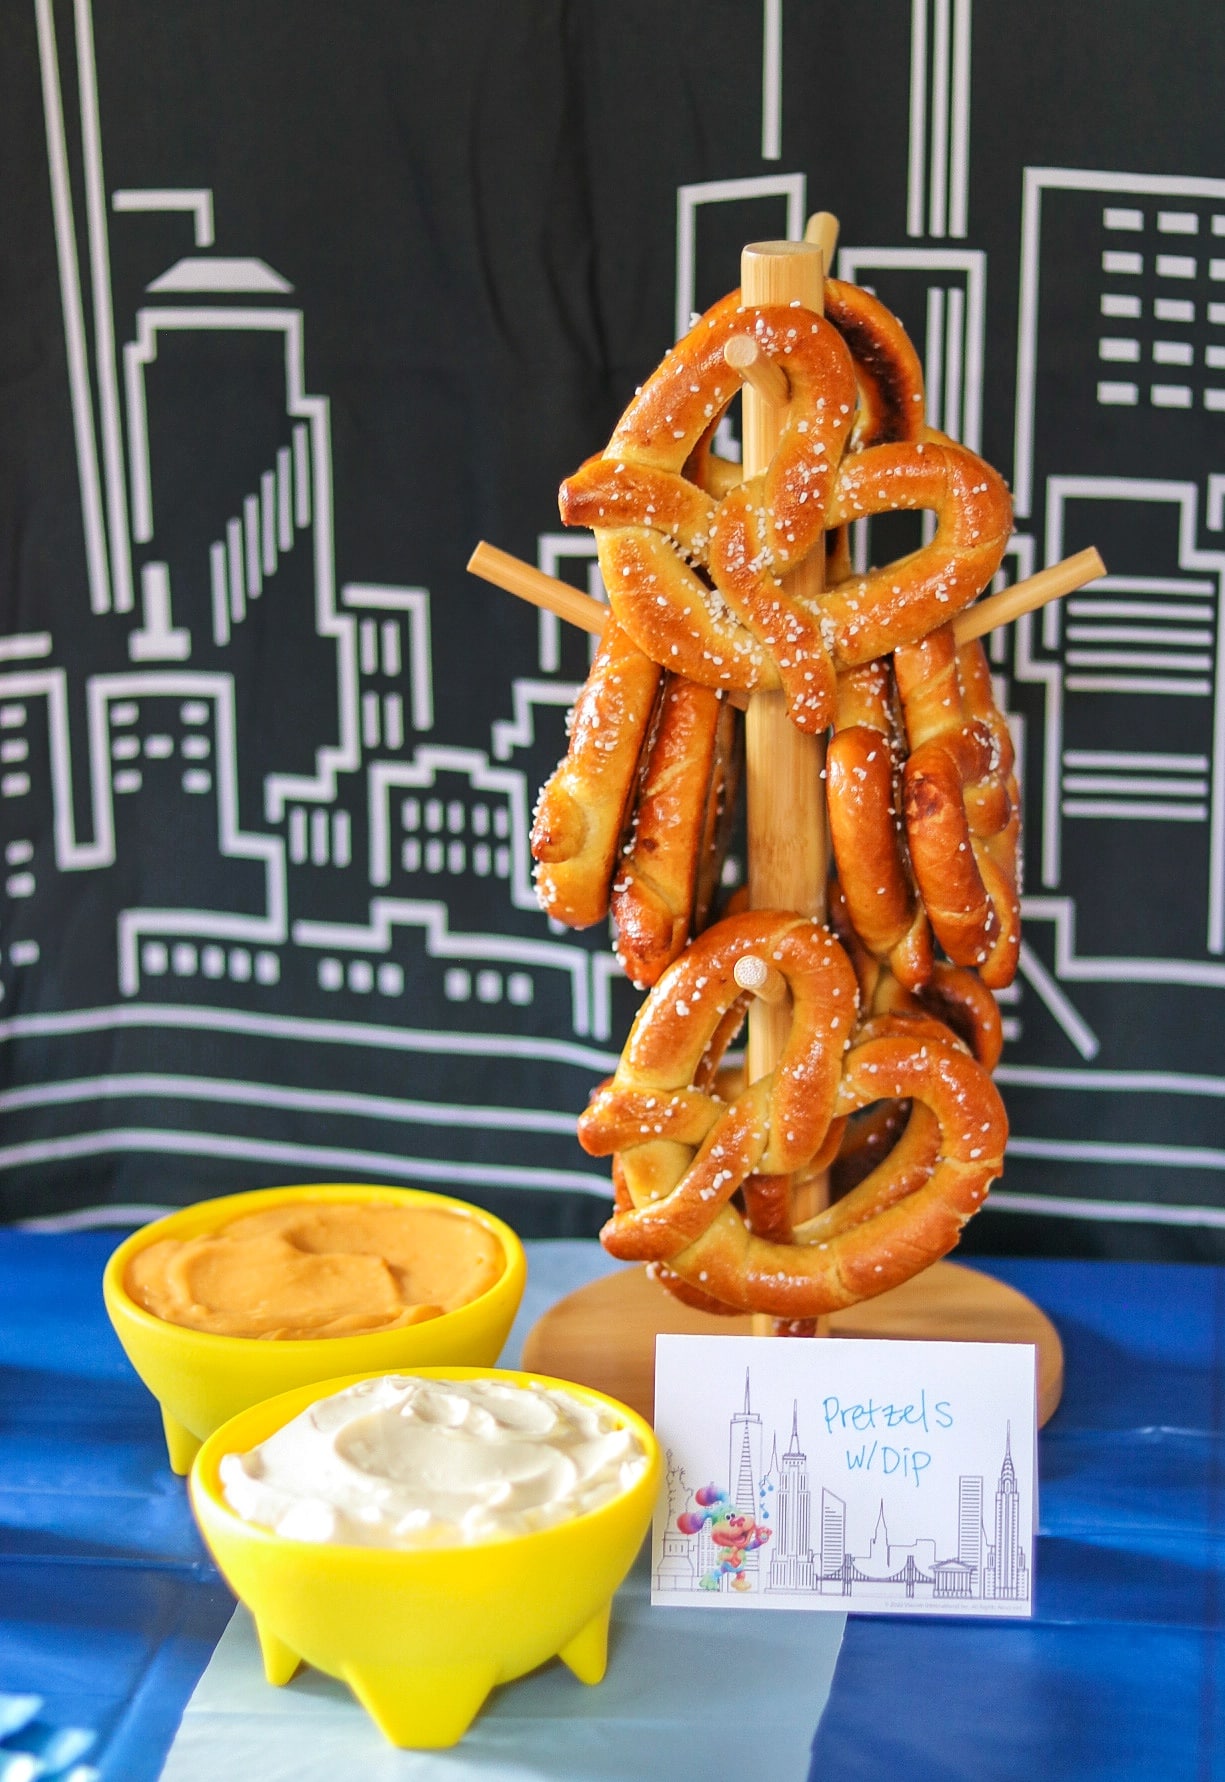 New York themed party food